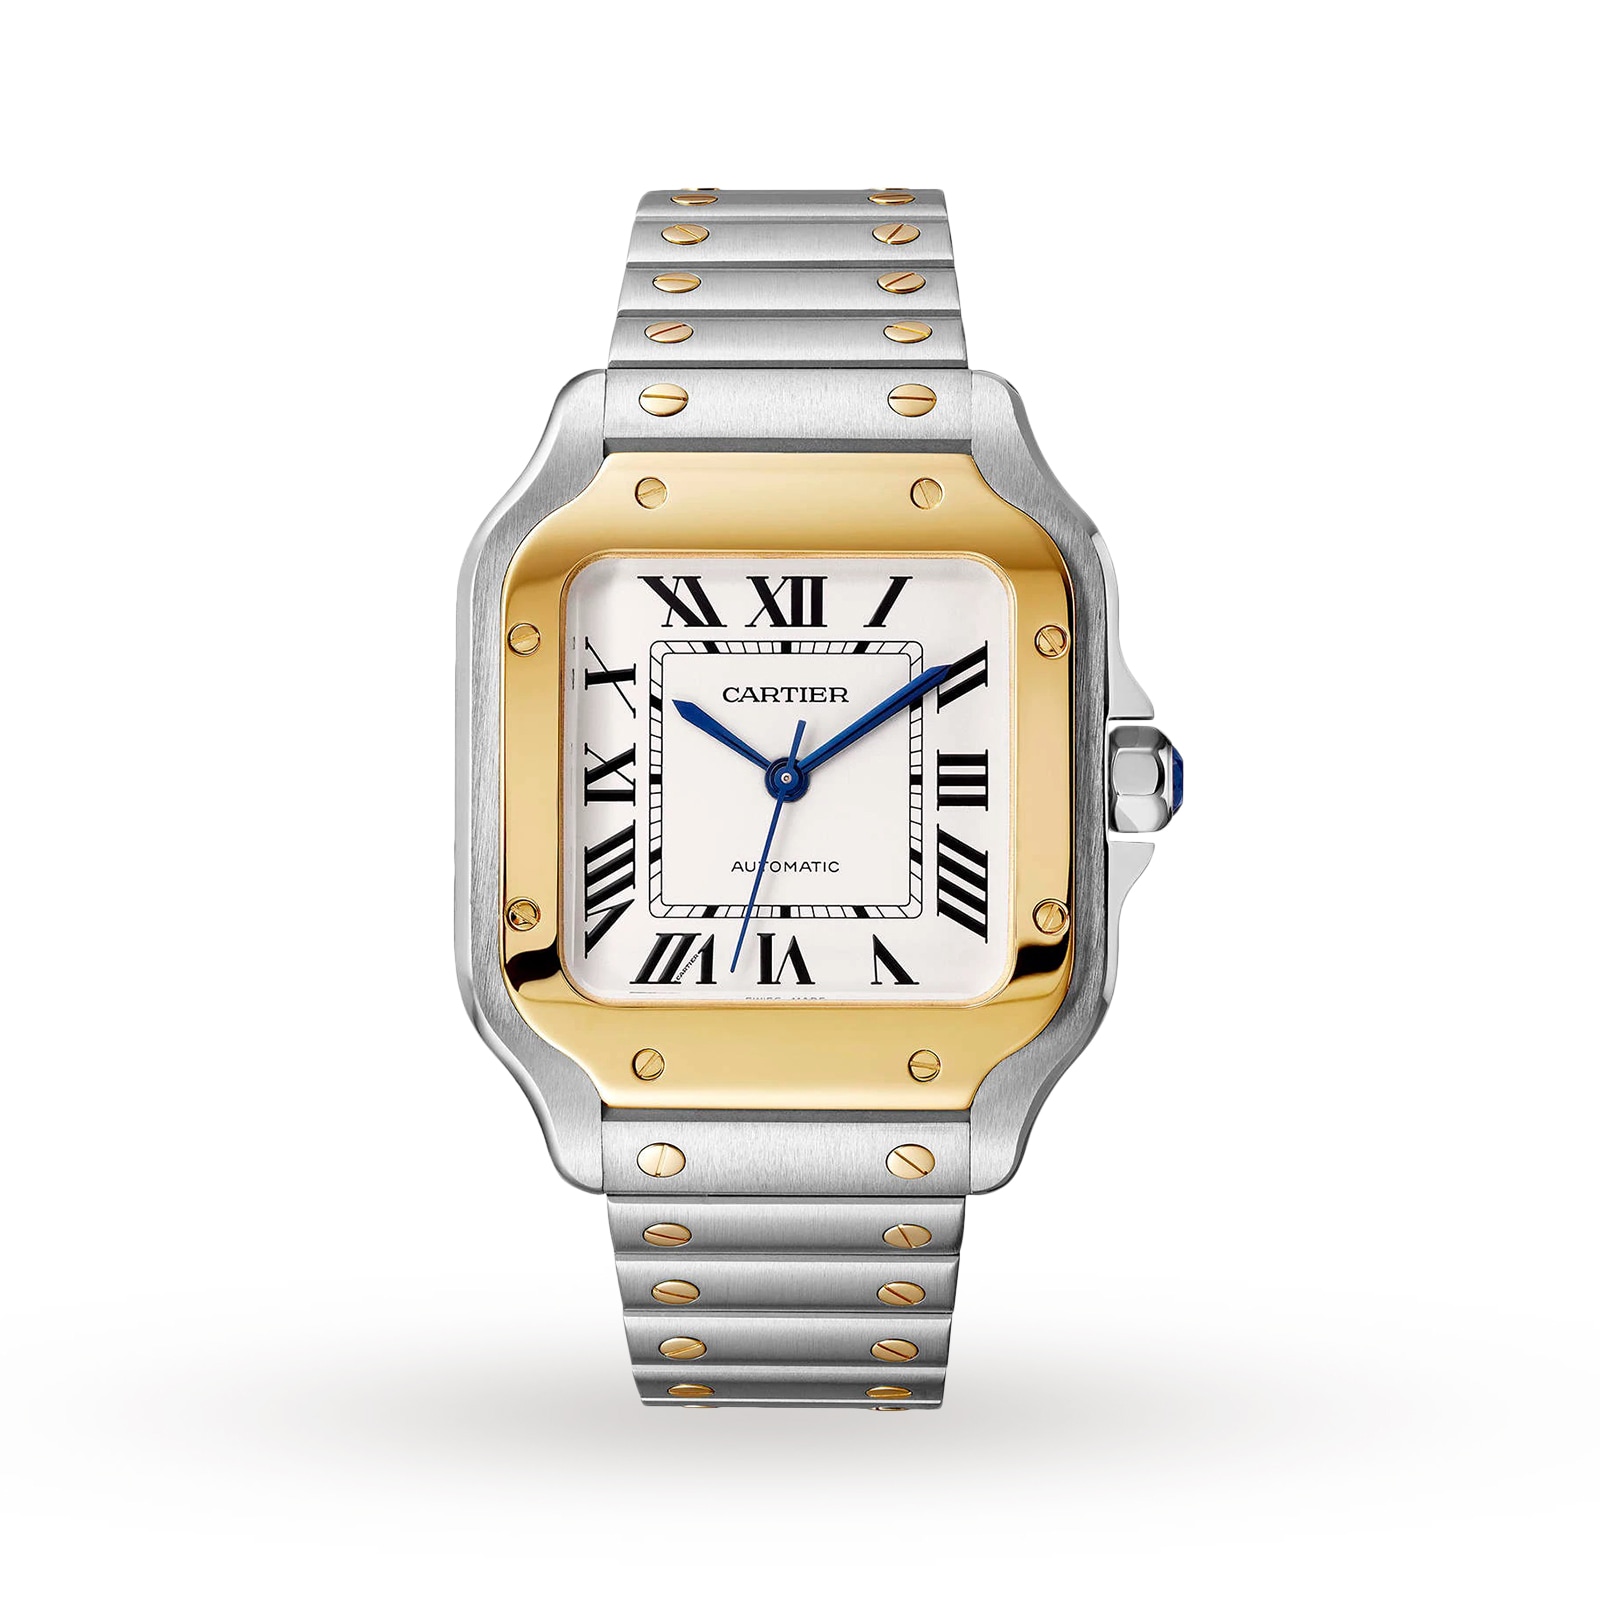 Buy Best Swiss watches online from us, by Platina Watch & Co